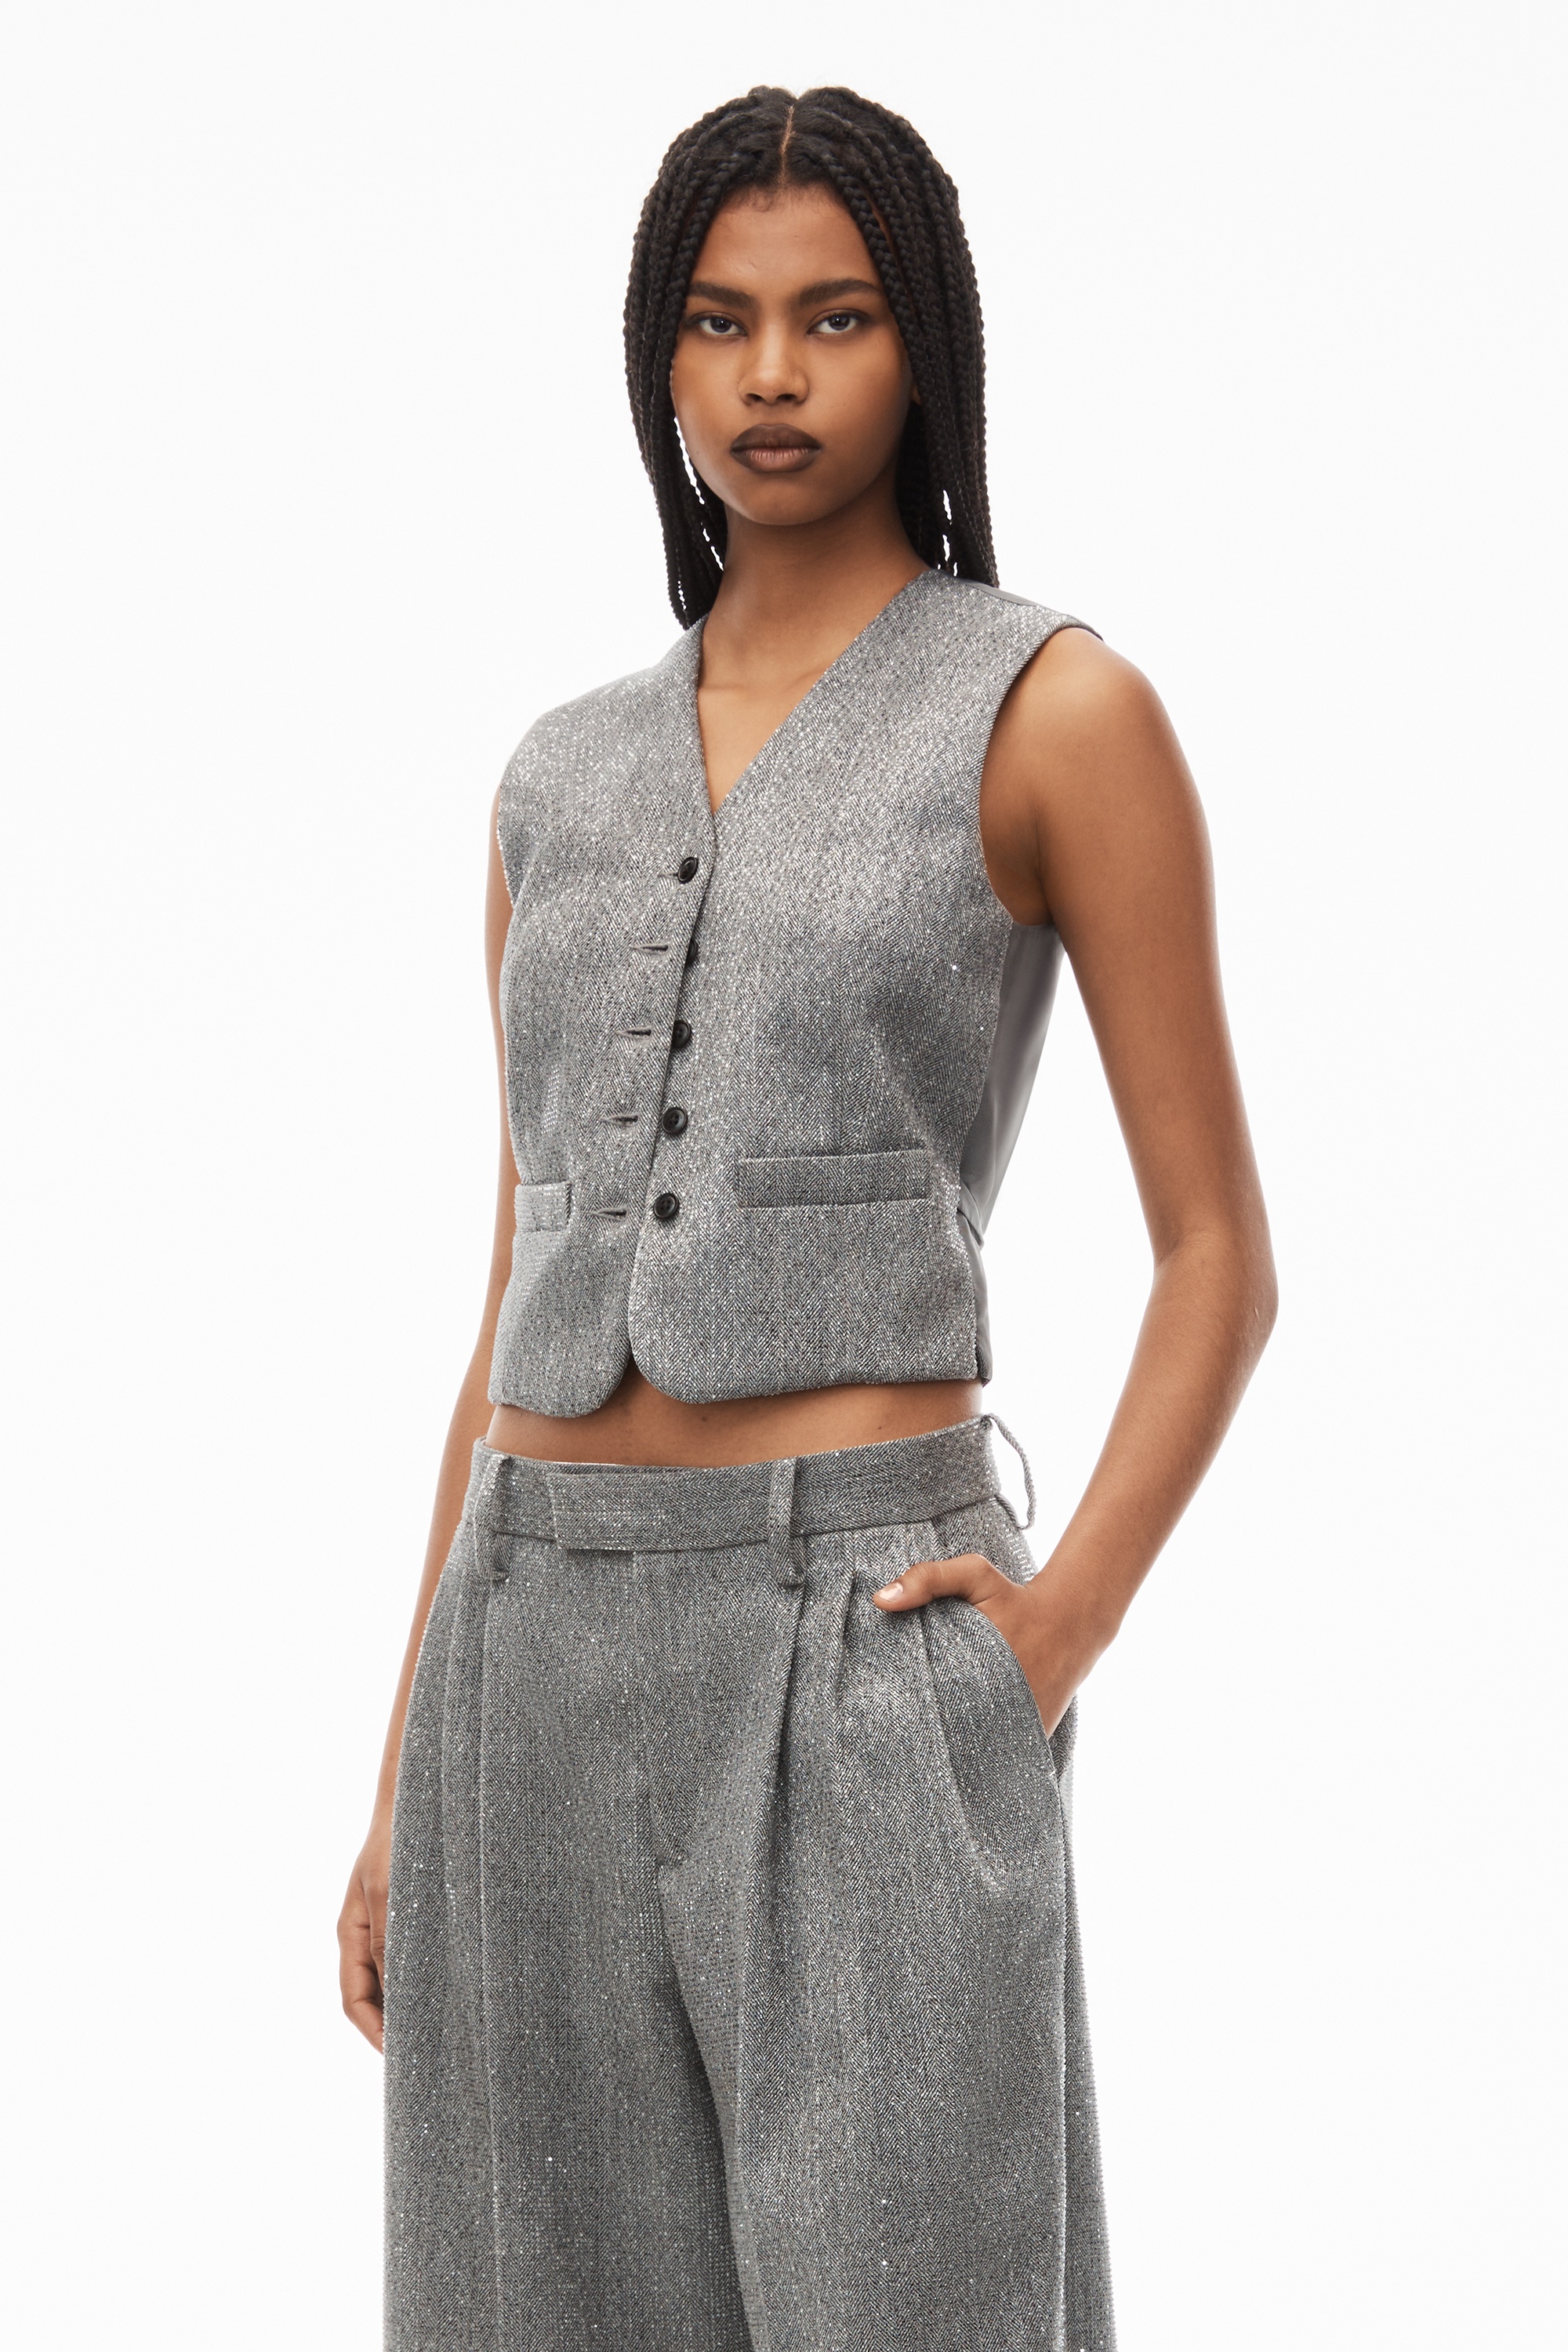 ALEXANDER WANG, Tailored Culotte With Layered Boxer, GREY, Women